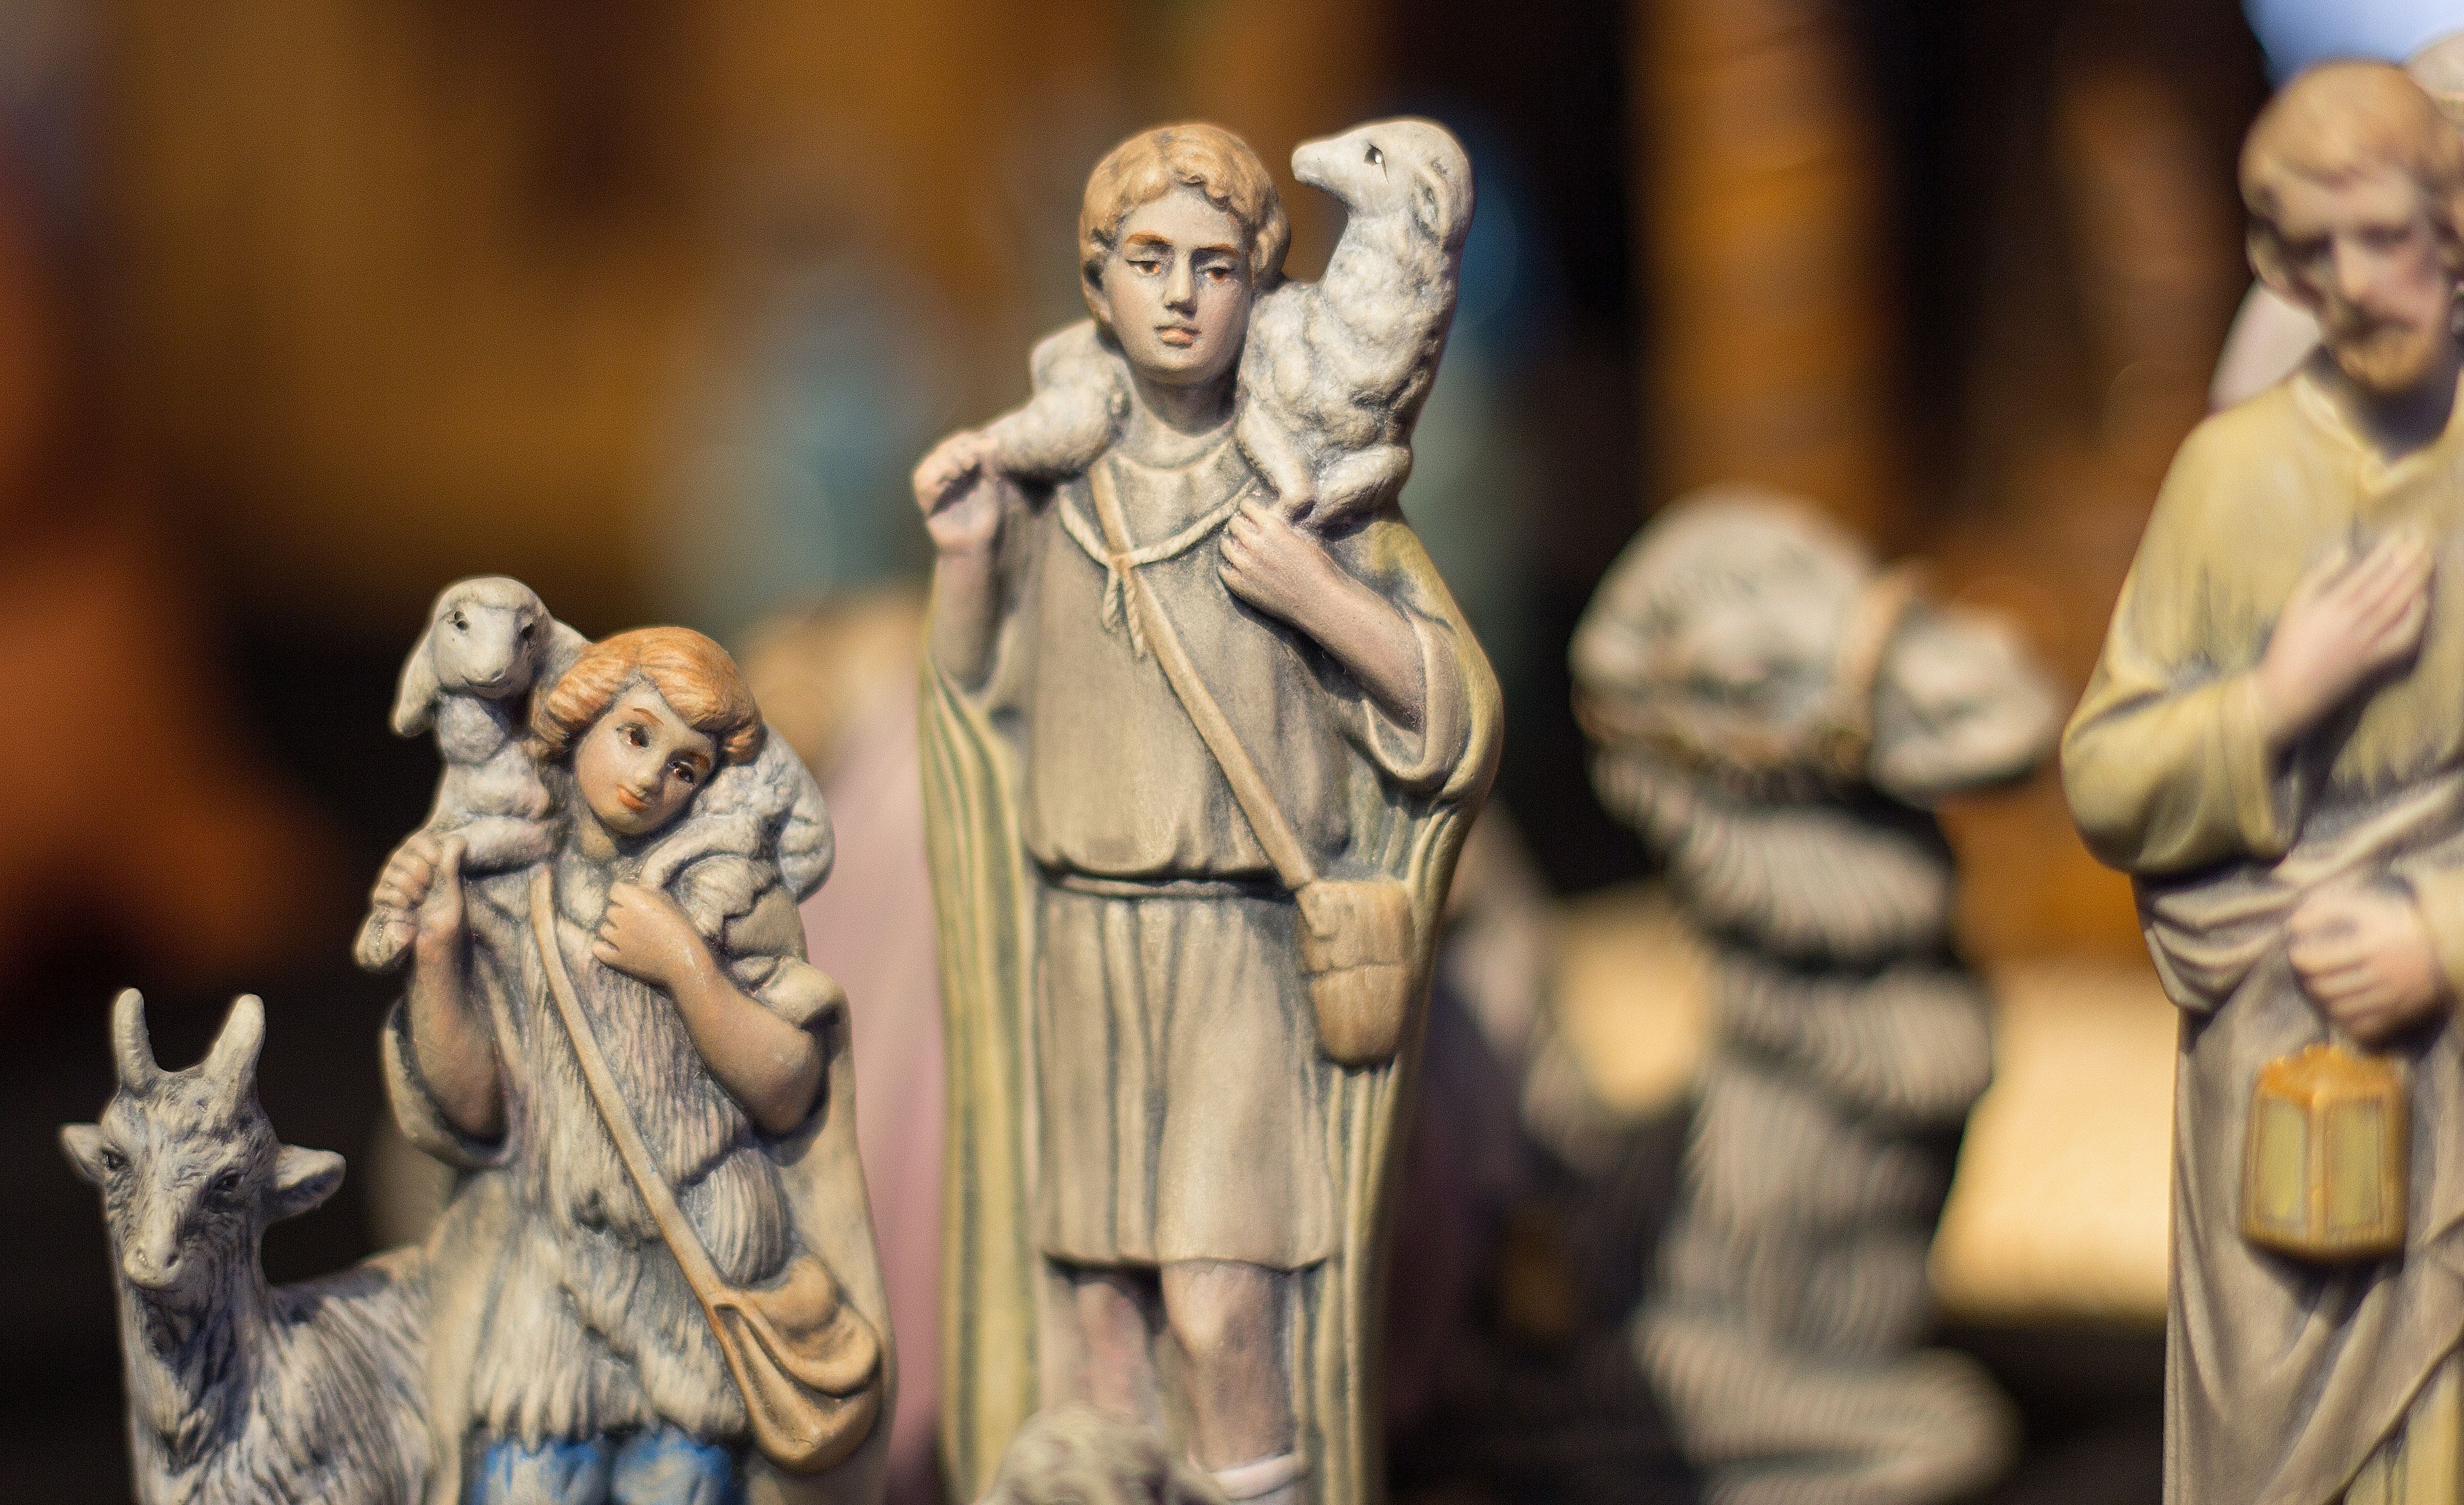 Several shepherd figurines from a Nativity set.